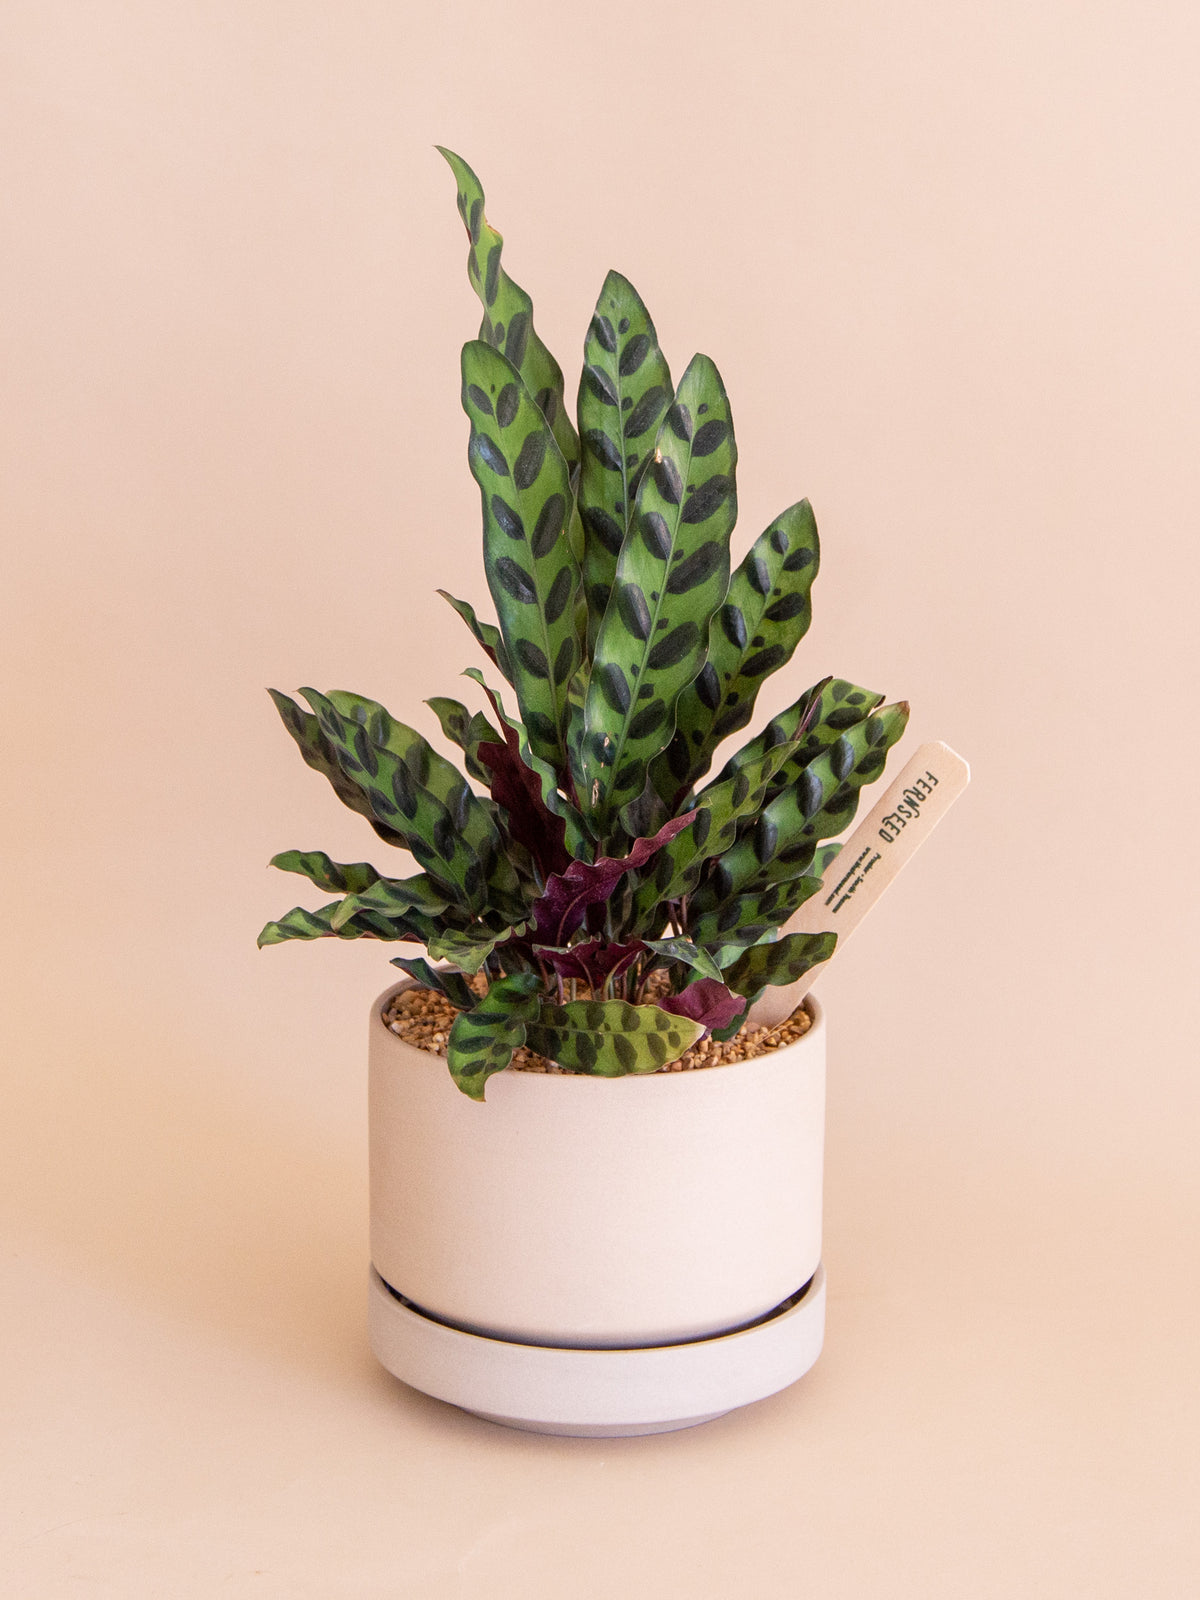 With Sympathy | Potted Plant Gift